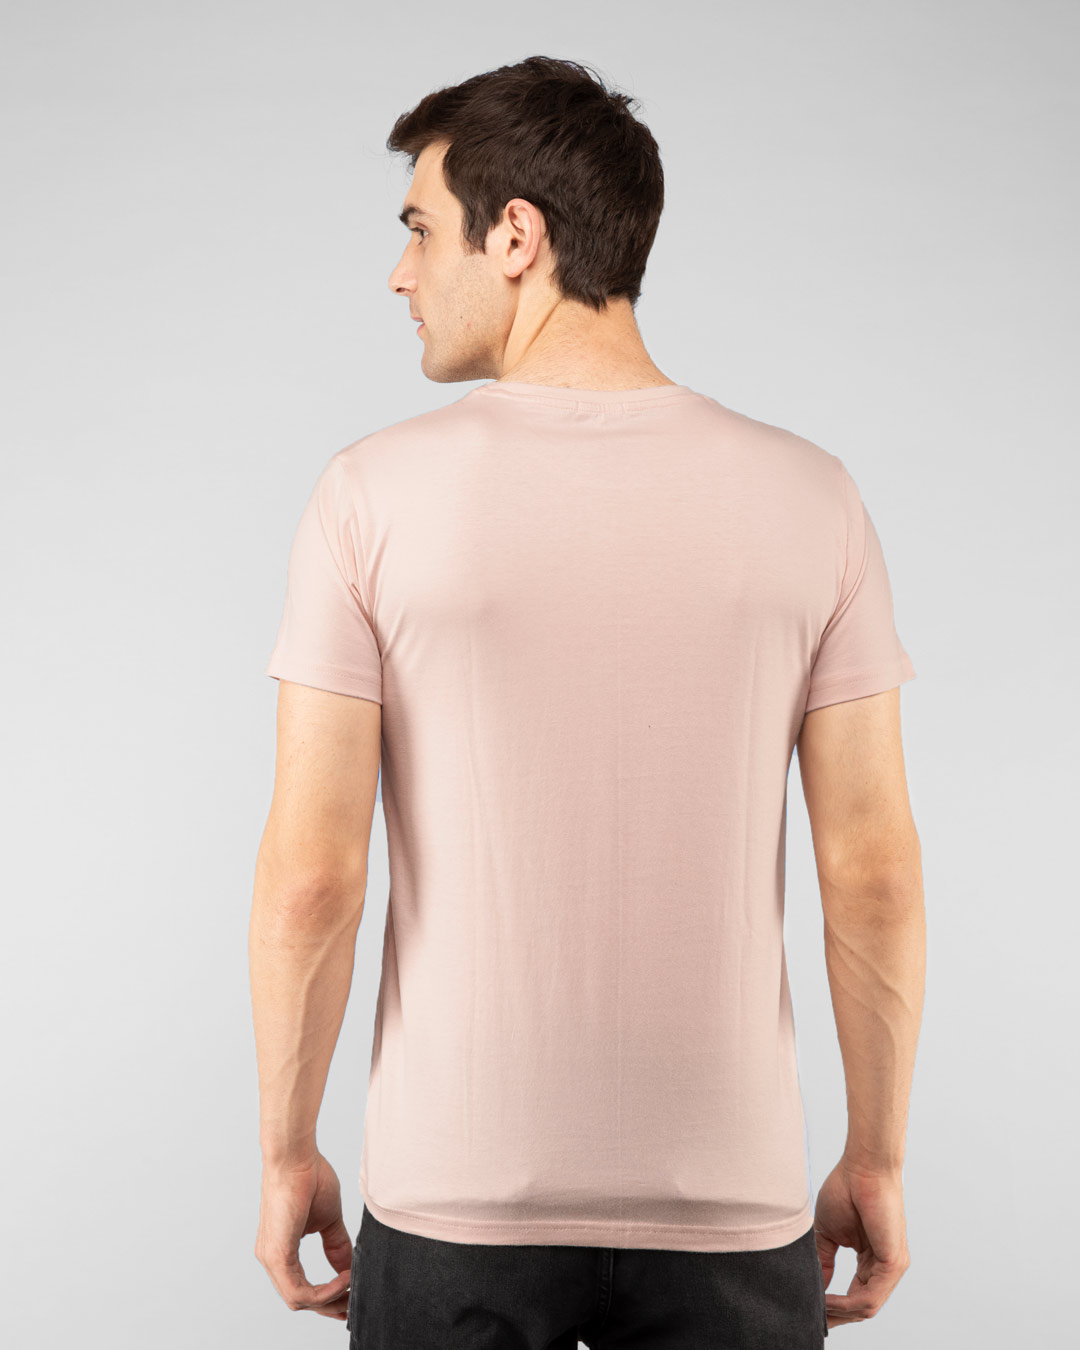 Shop With a Plan Half Sleeve T-Shirt Baby Pink  -Back